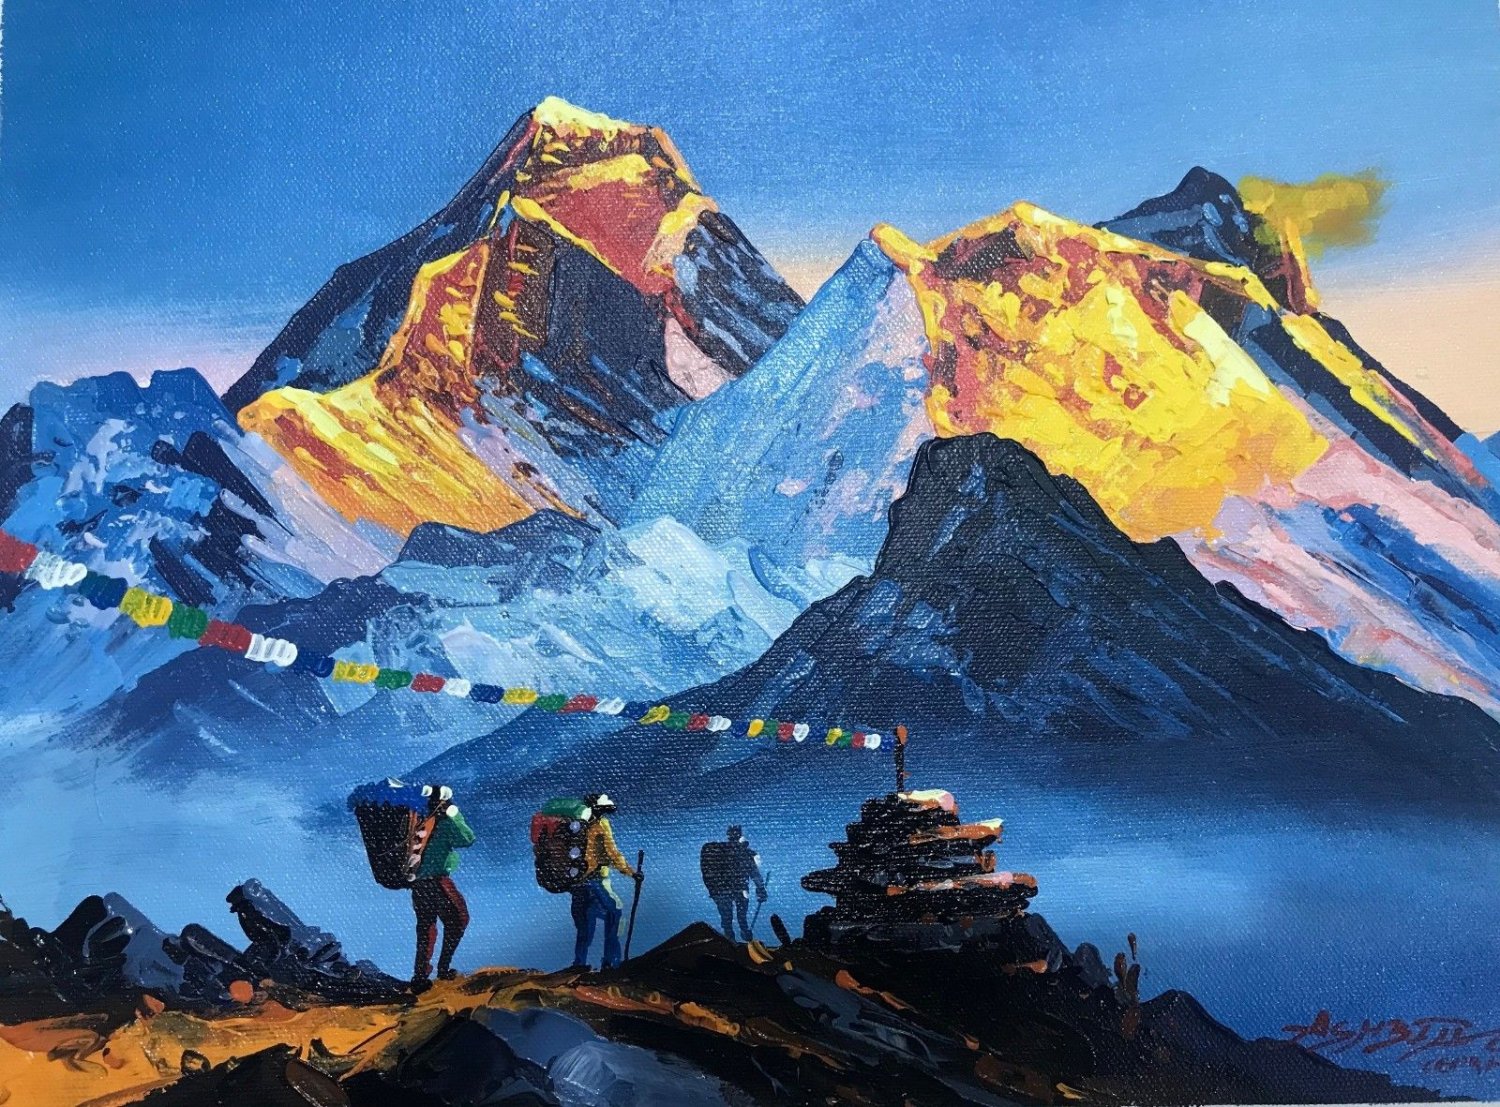 MOUNT EVEREST SUNSHINE VIEW FROM GOKYO ORIGINAL KNIFE PAINTING IN ACRYLICS